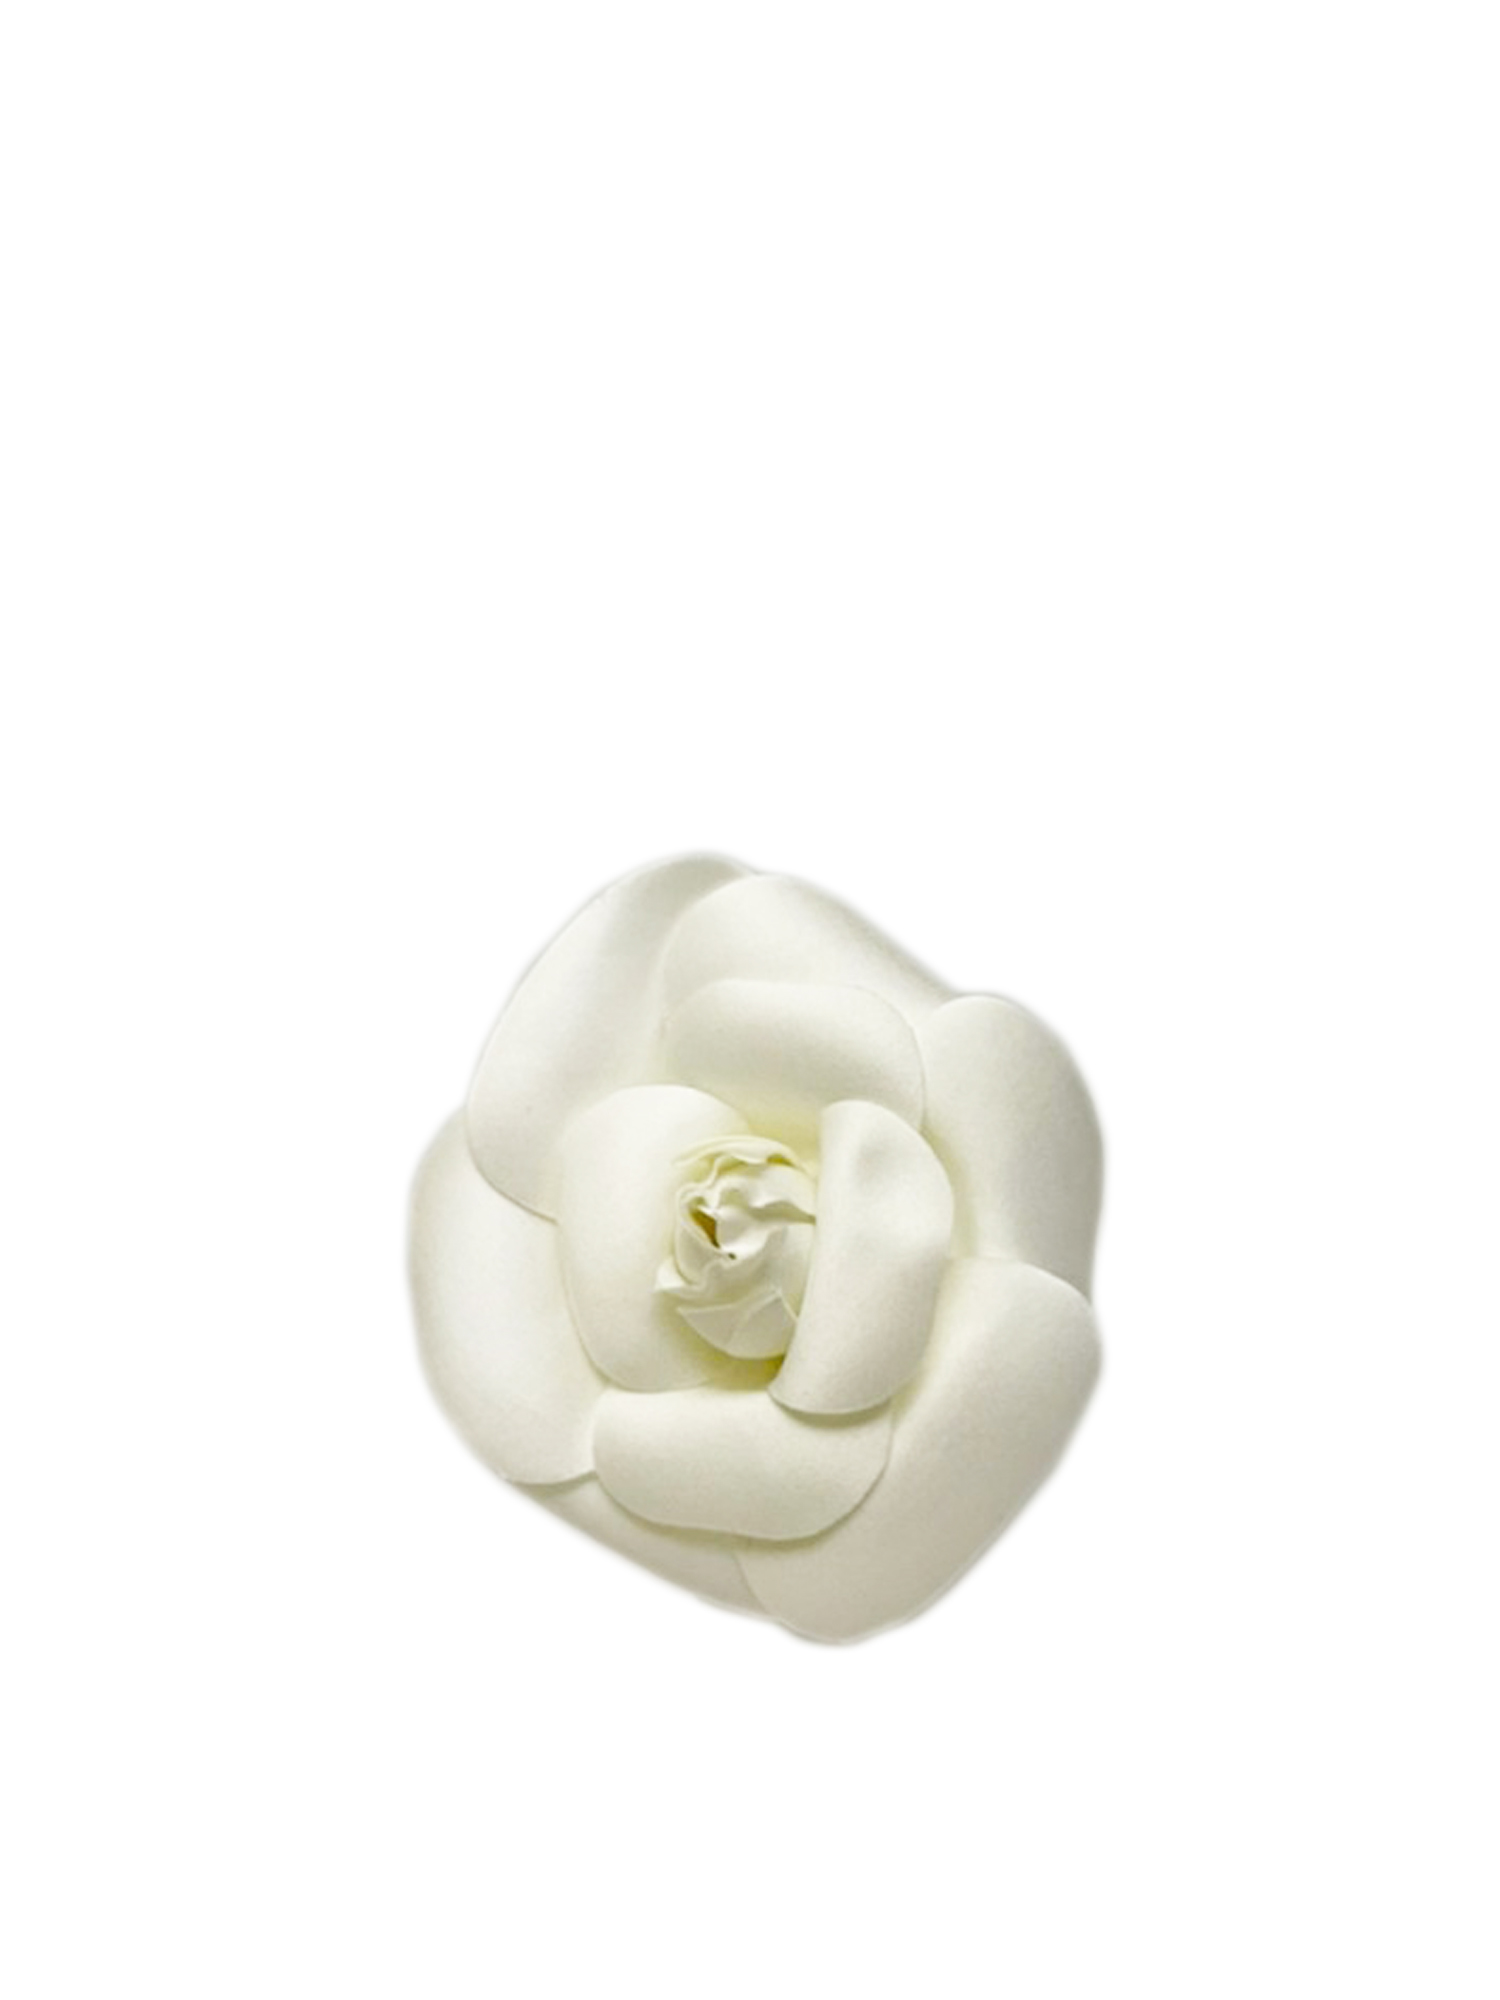 CHANEL Fabric Camellia Flower Brooch White 392774